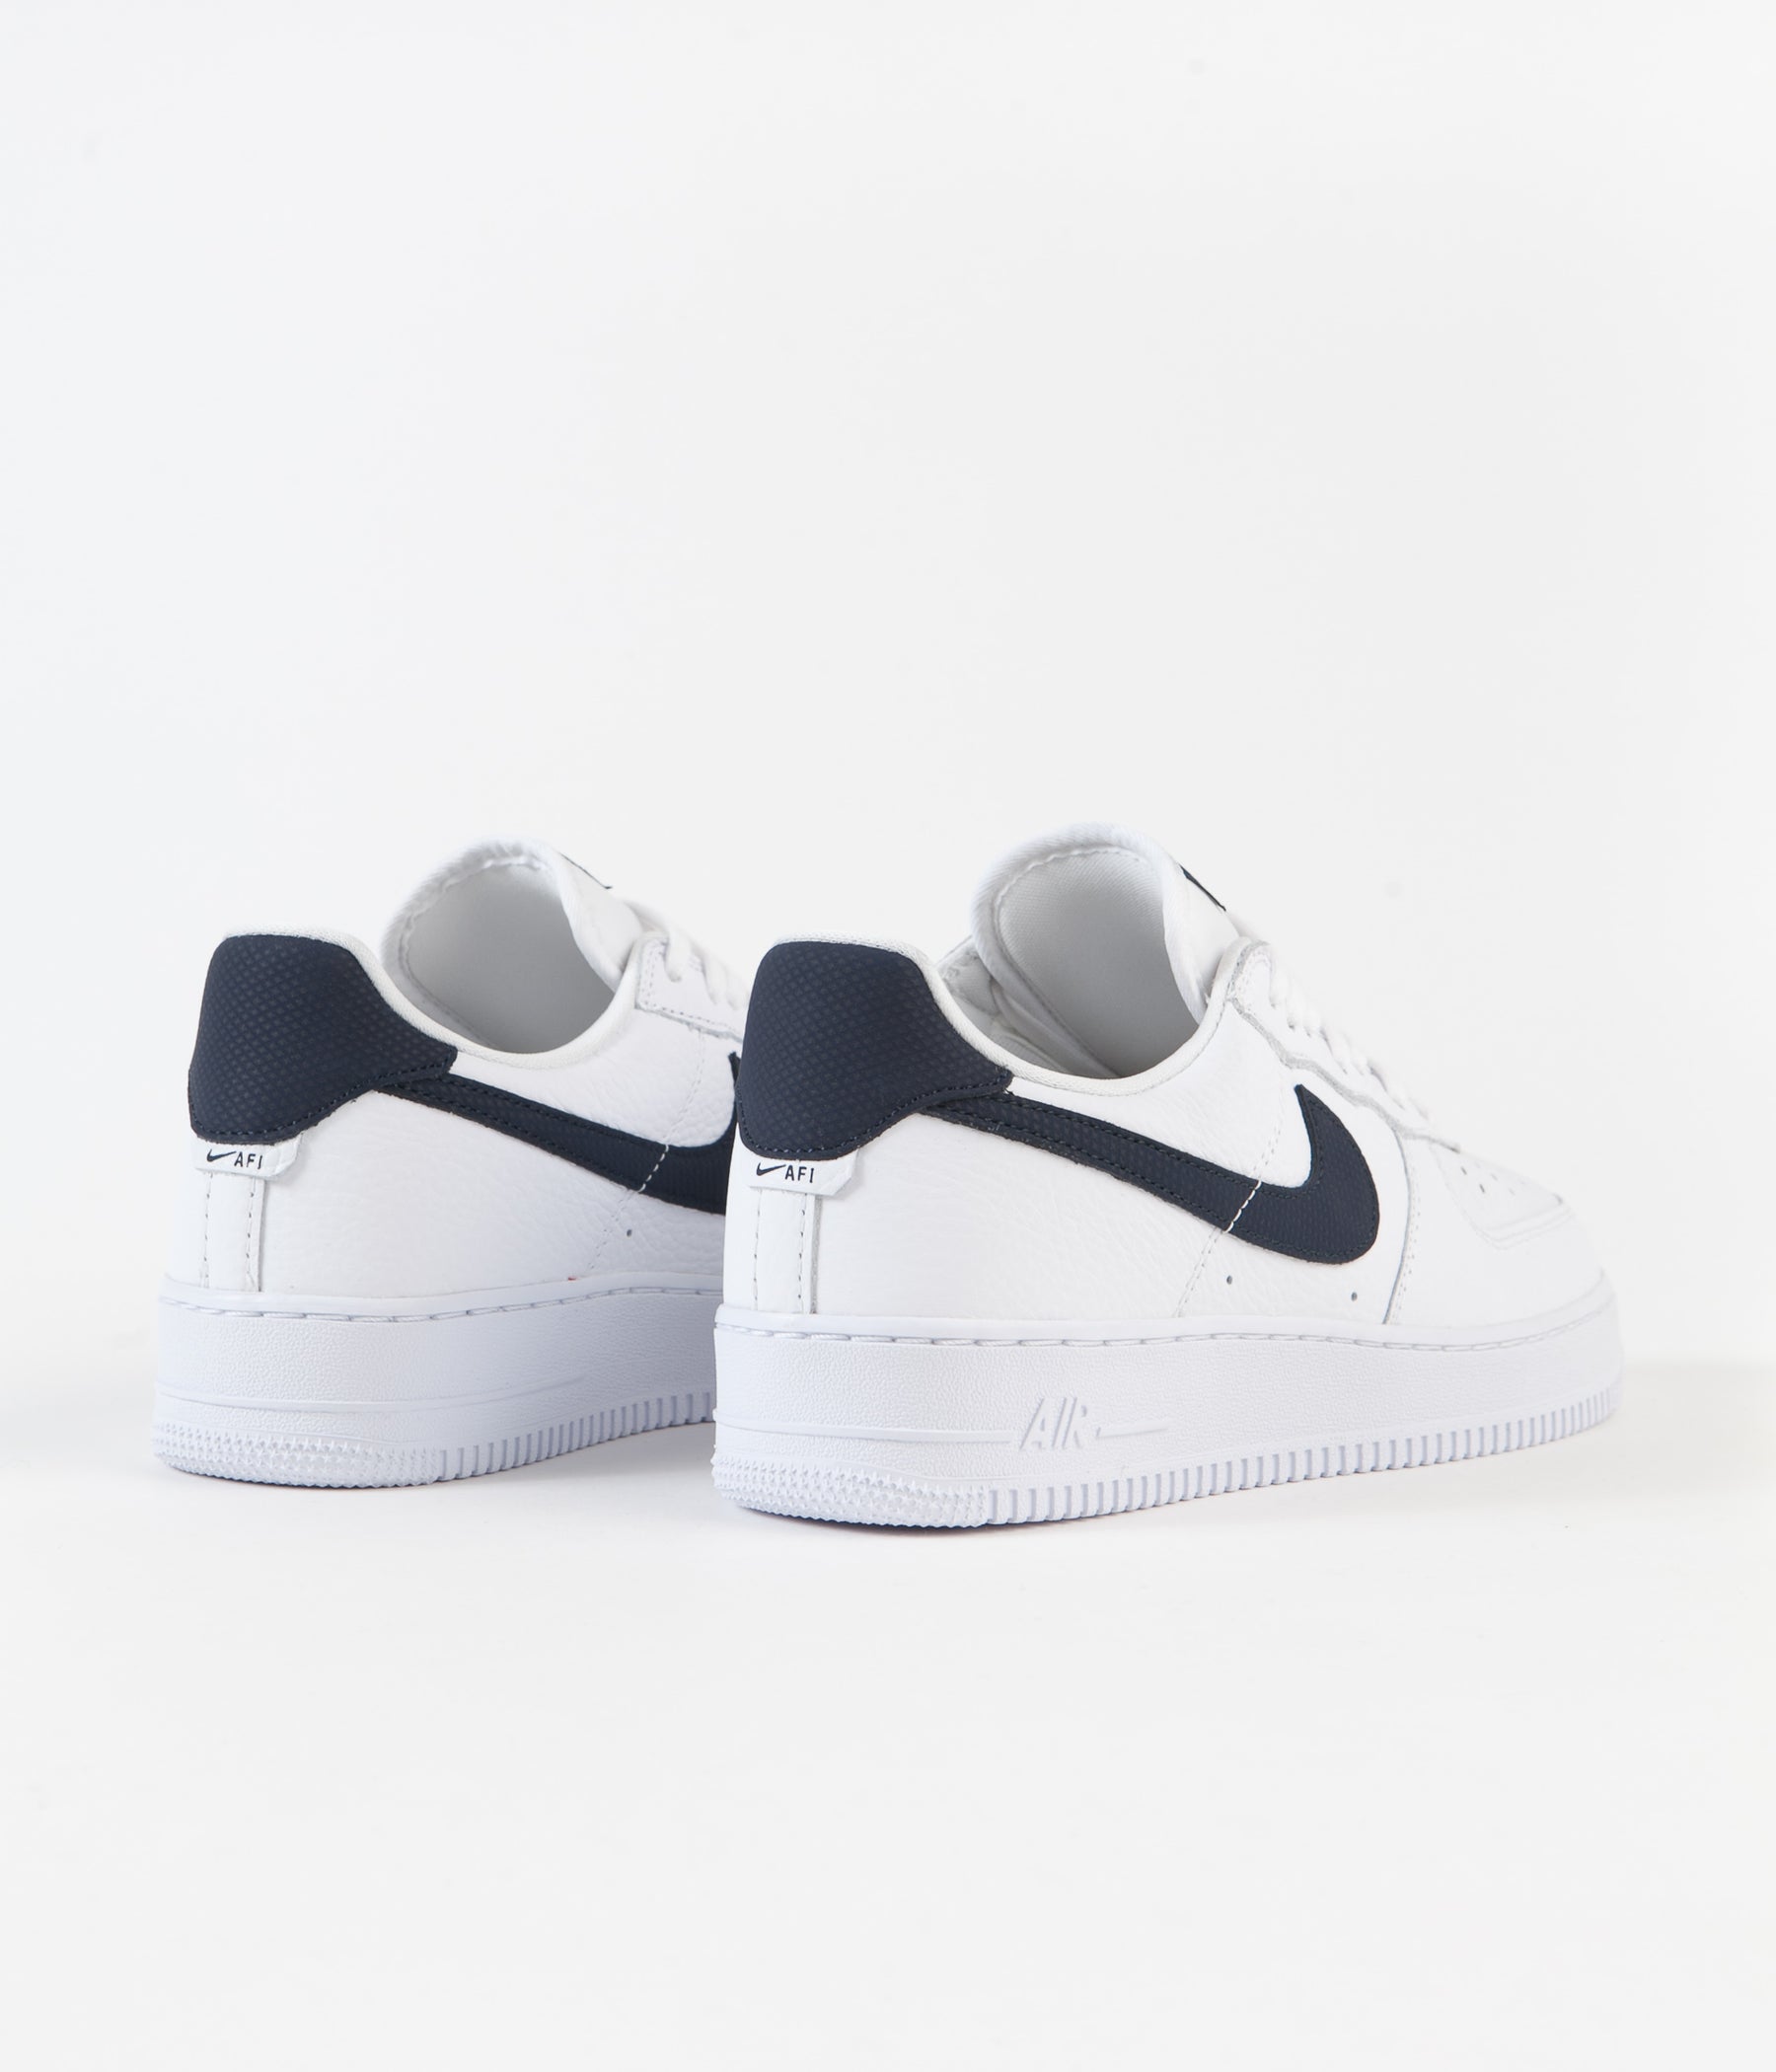 Nike Air Force 1 '07 Craft Shoes - White / Obsidian - White | Always in